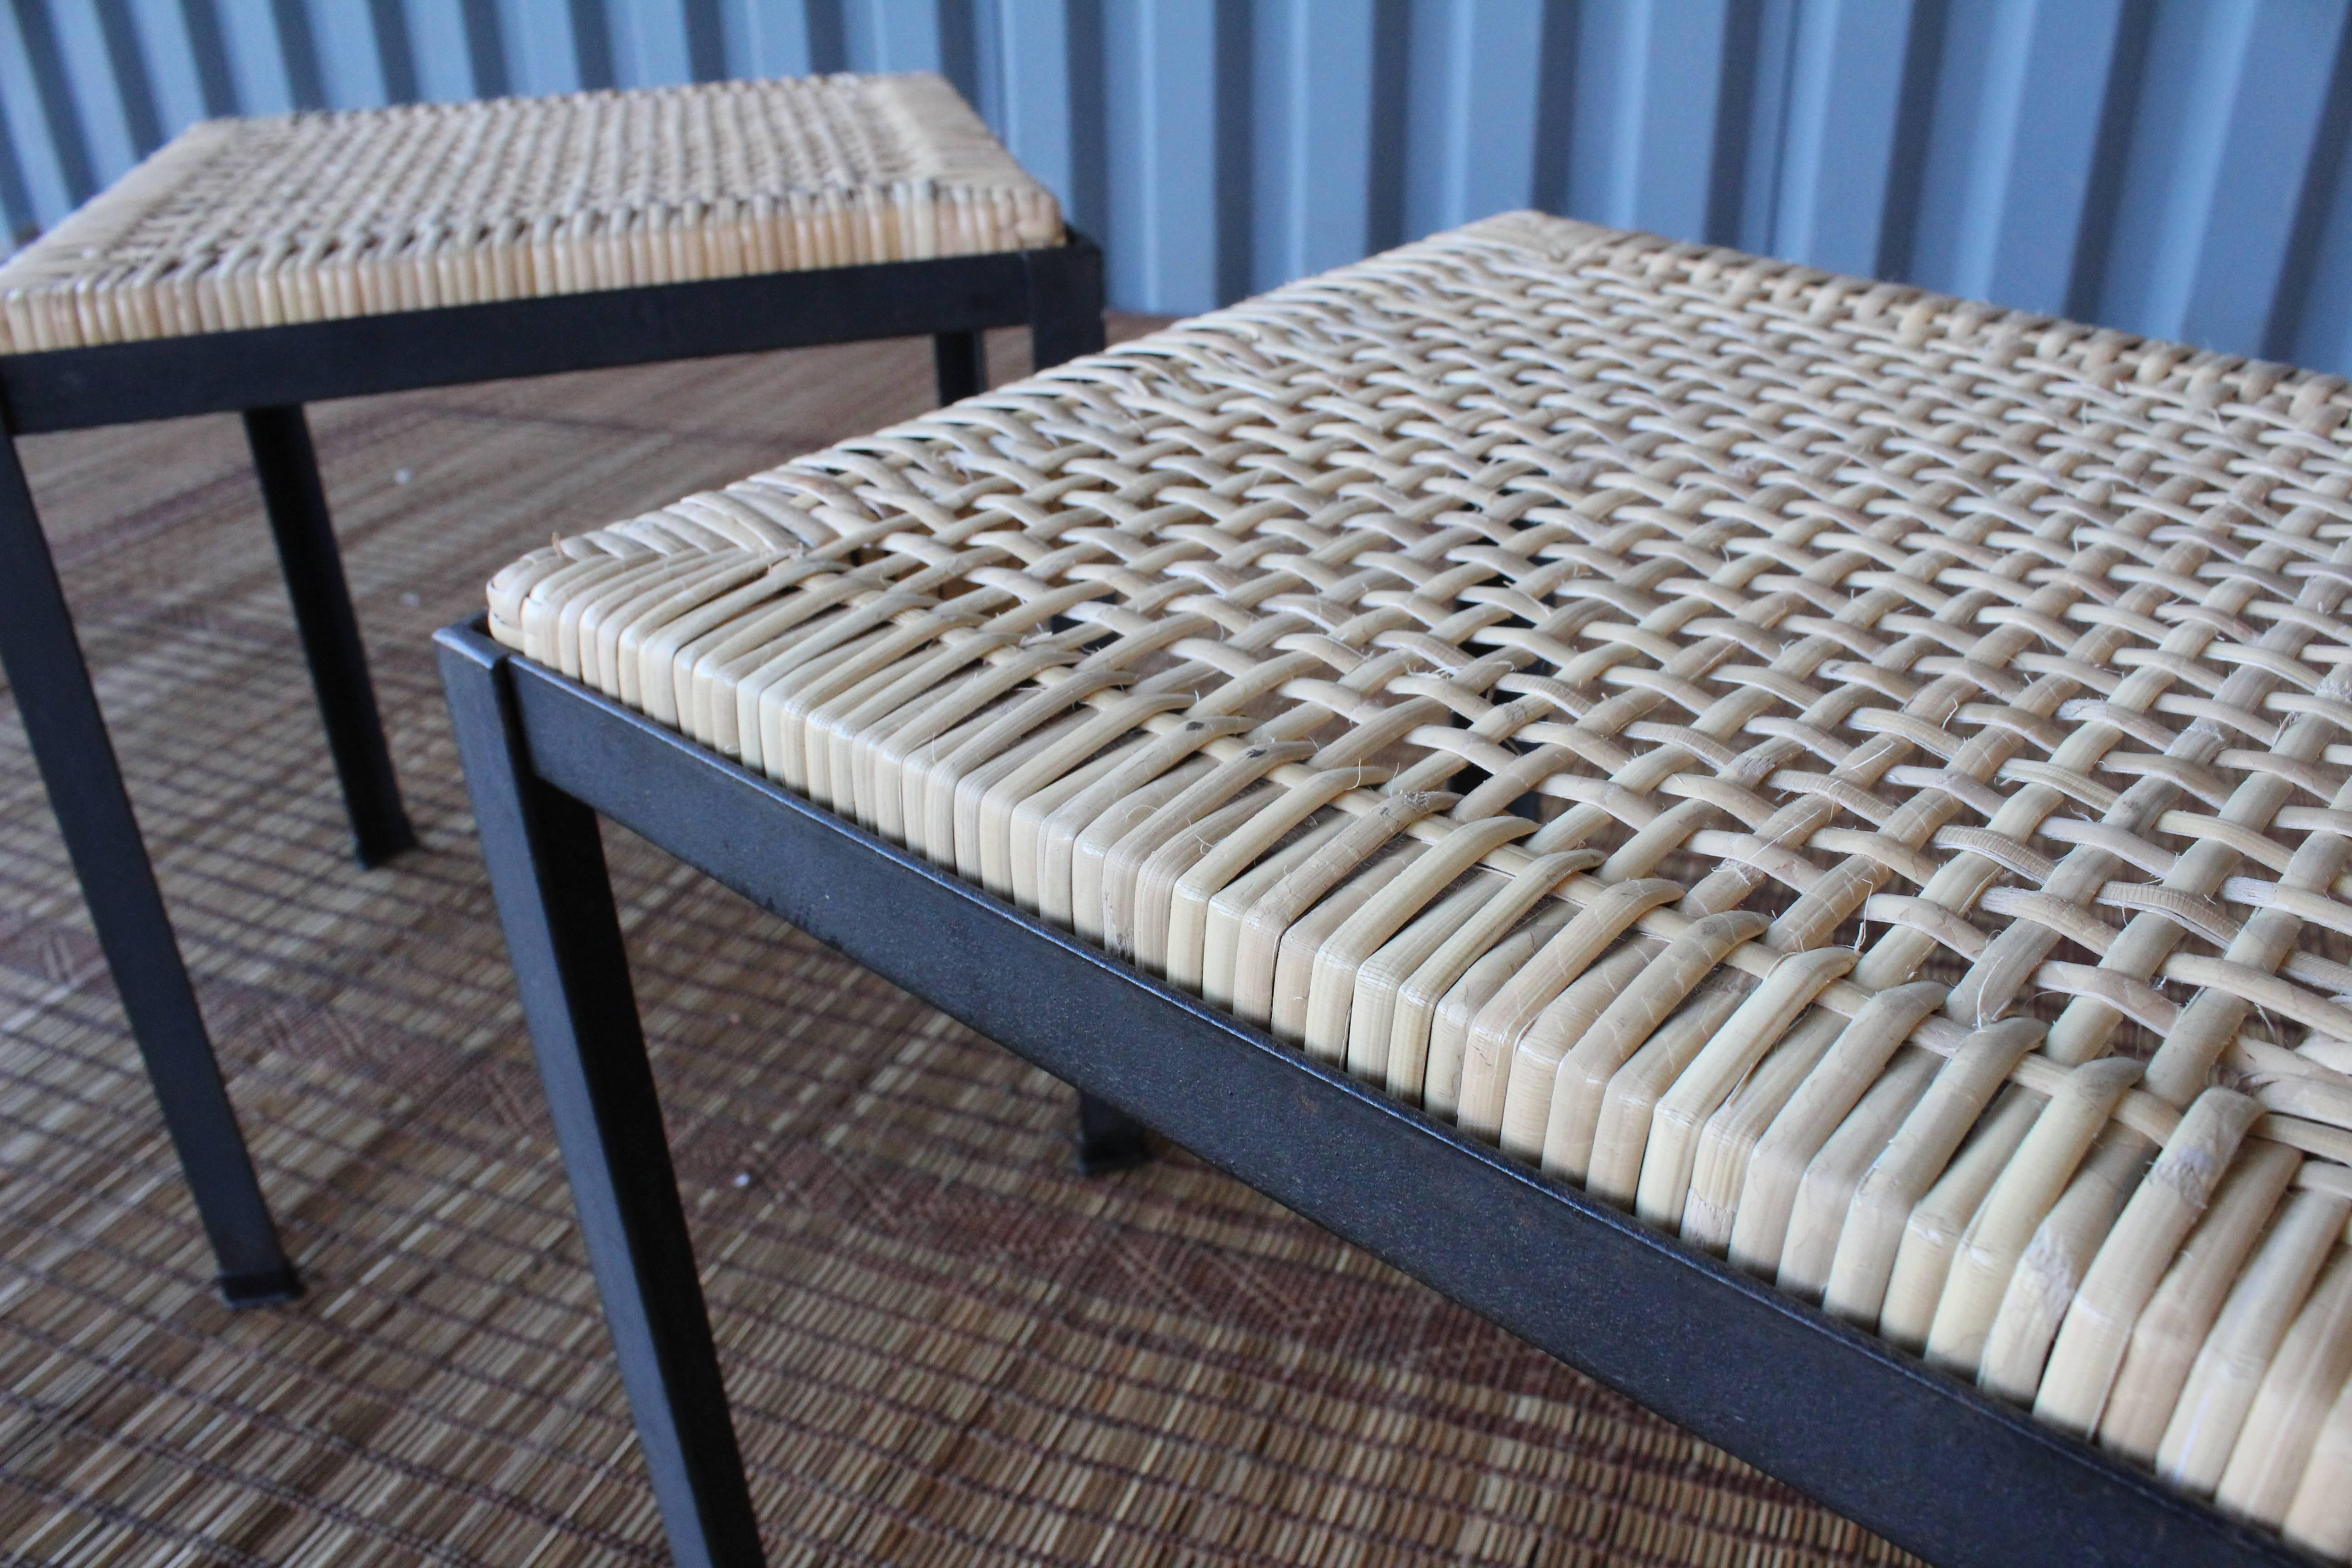 Hand-Woven Pair of Stools by Danny Ho Fong for Tropi-Cal